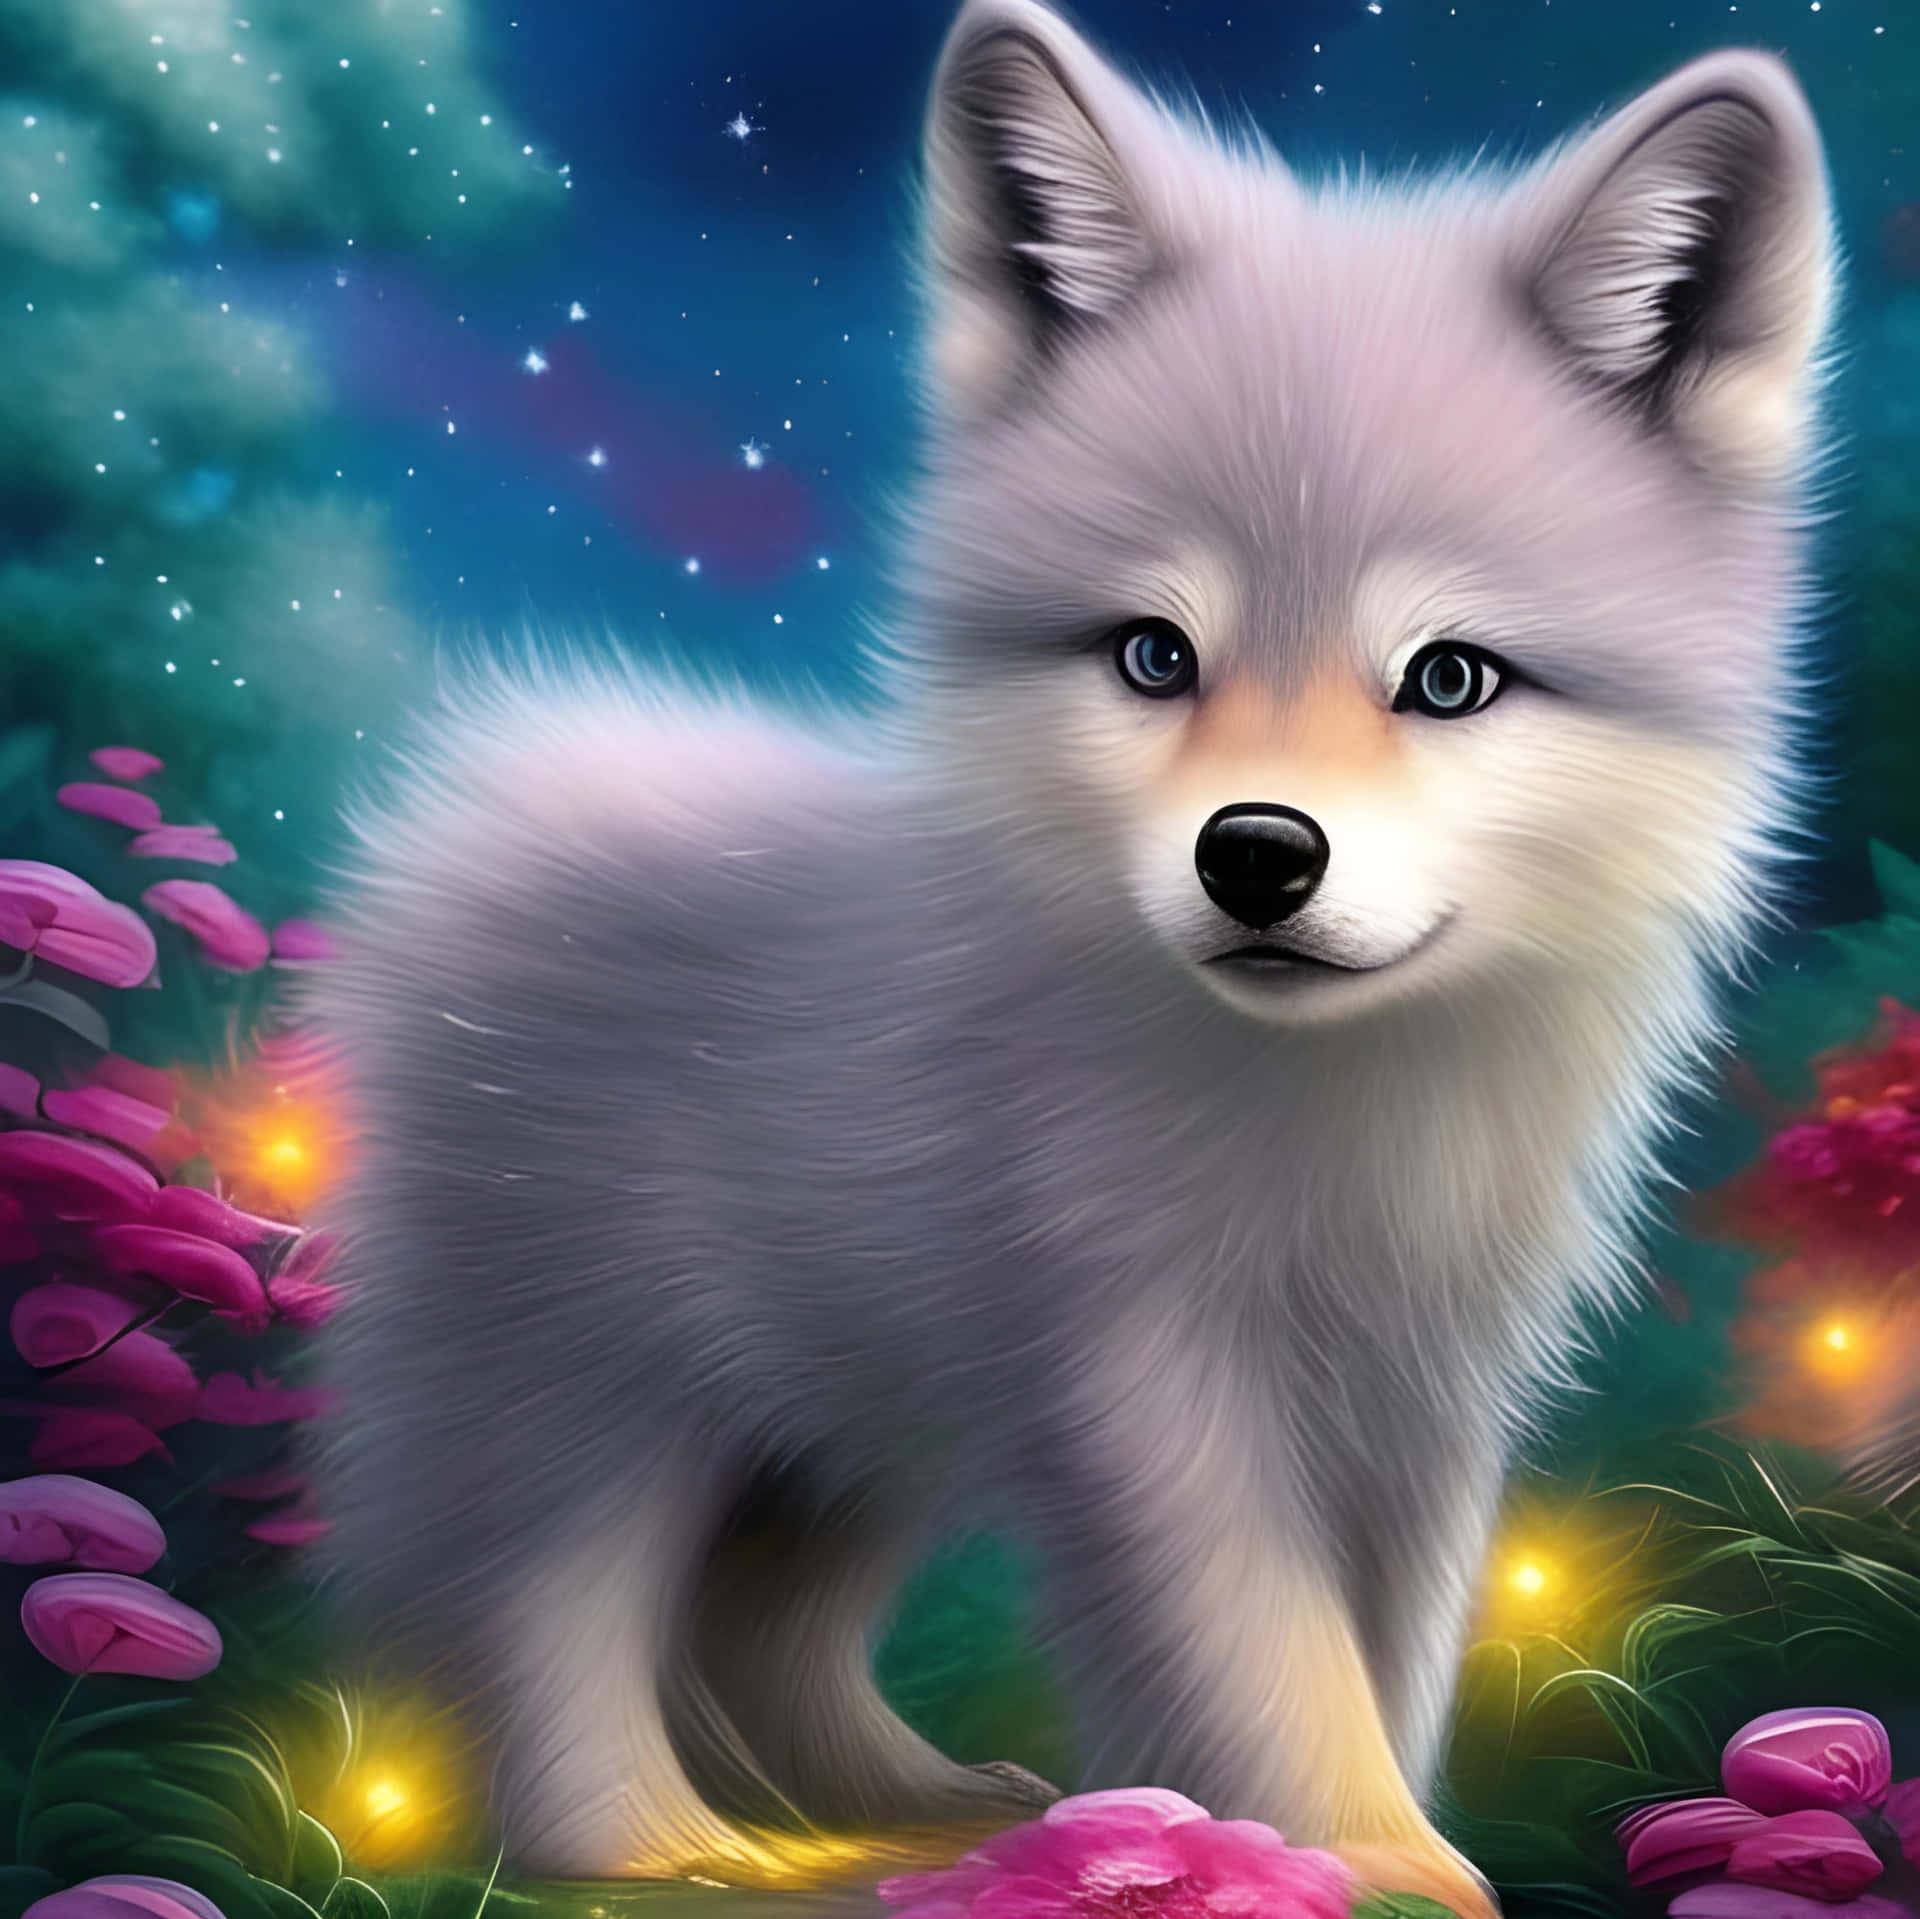 A Cute Fox In The Forest With Flowers Wallpaper